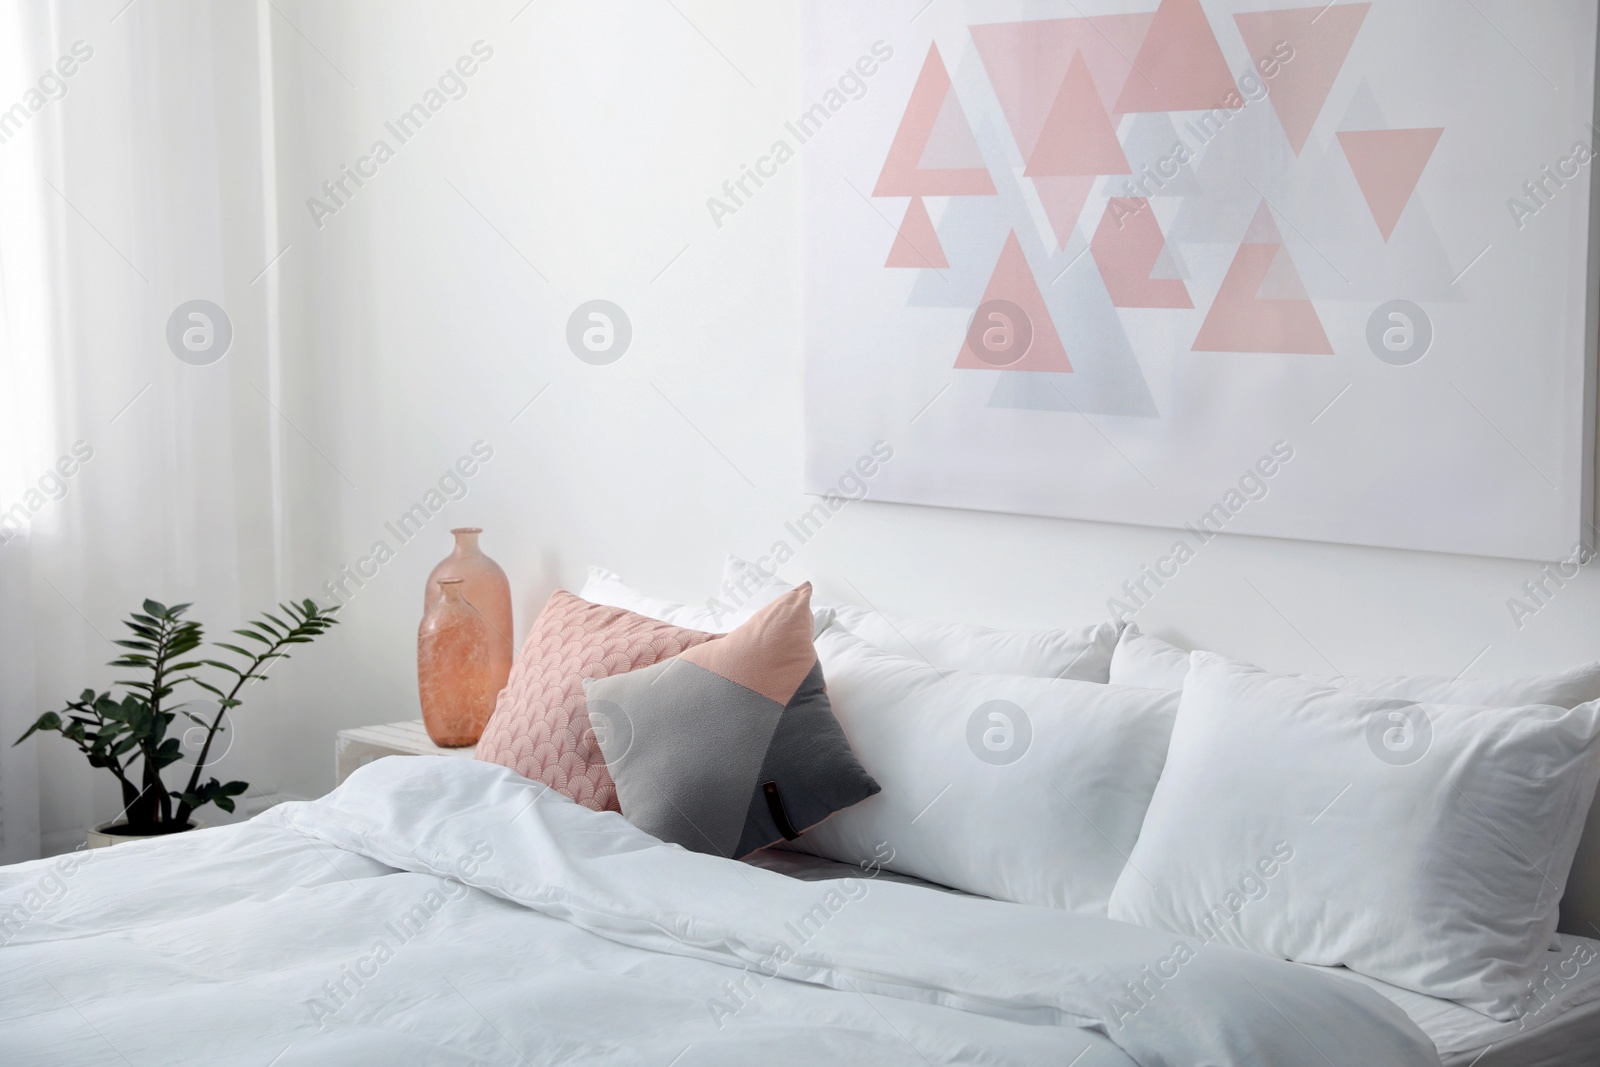 Photo of Comfortable bed with soft pillows in room interior